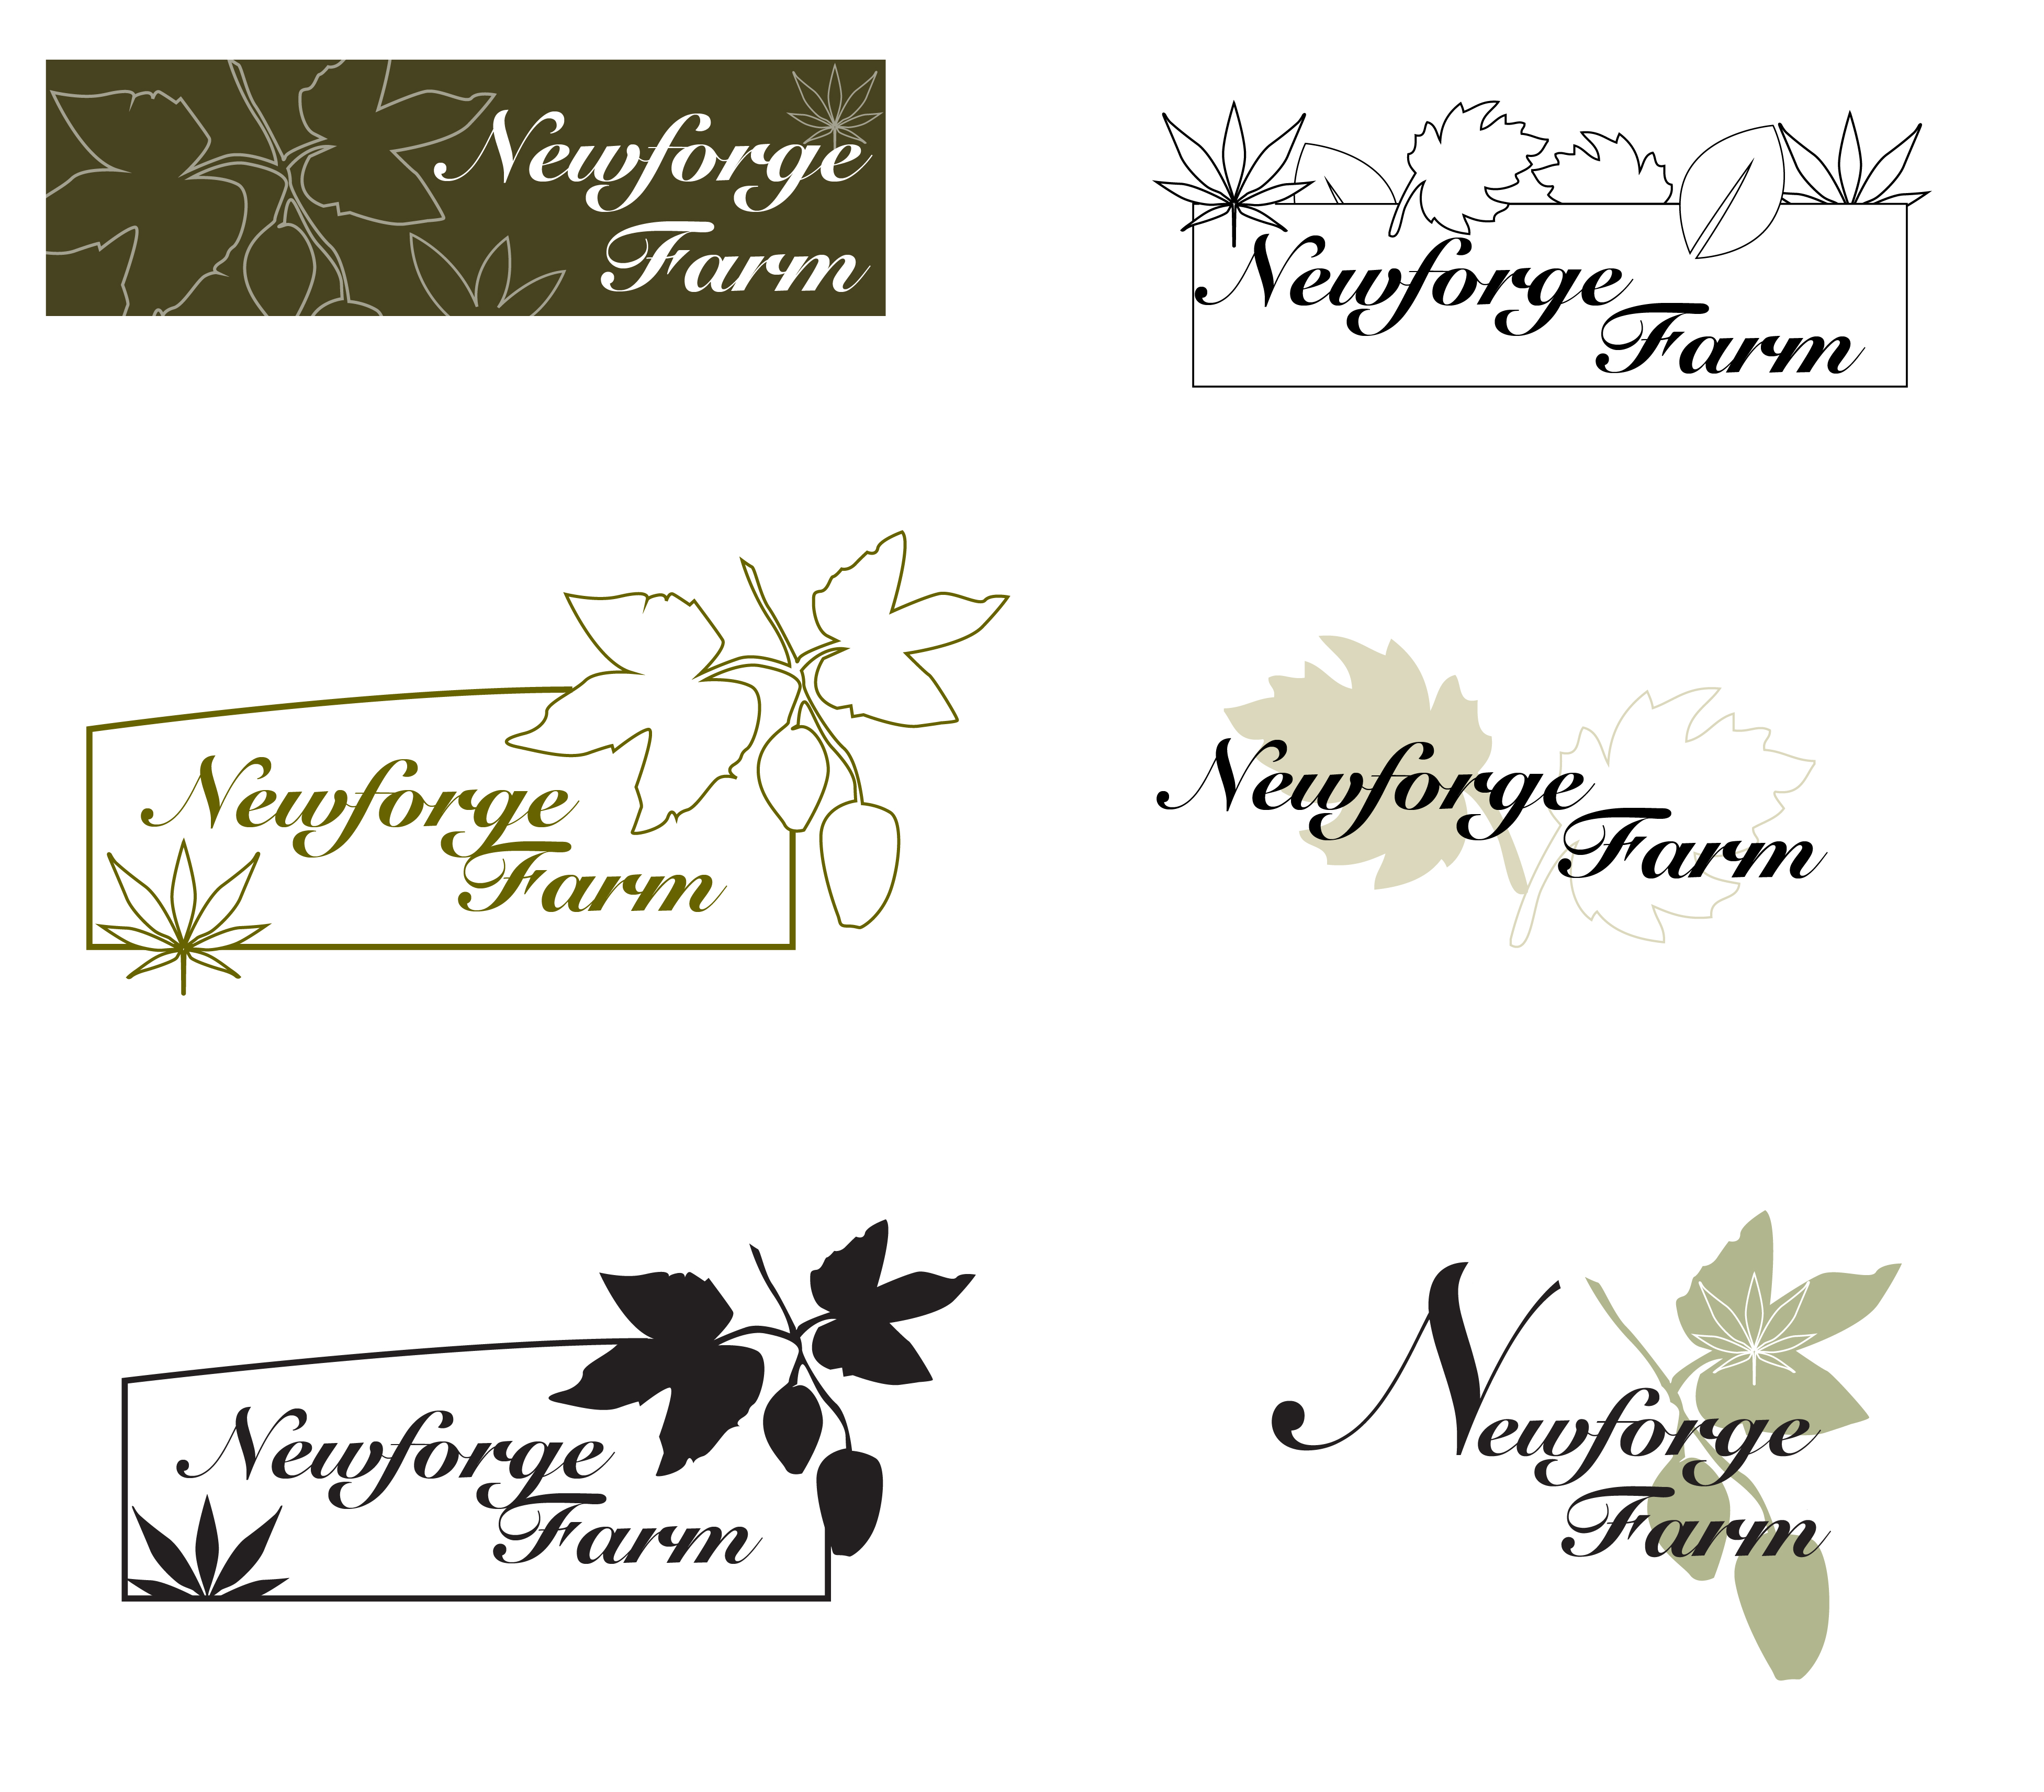 six different logos for the restaurant, Newforge farm. Each comprises the words “newforge farm” in the same cursive script font. They also all feature stylised images of leaves in different orientations and colours. The various colour schemes are khaki and white; black and white; or khaki, black and white.>